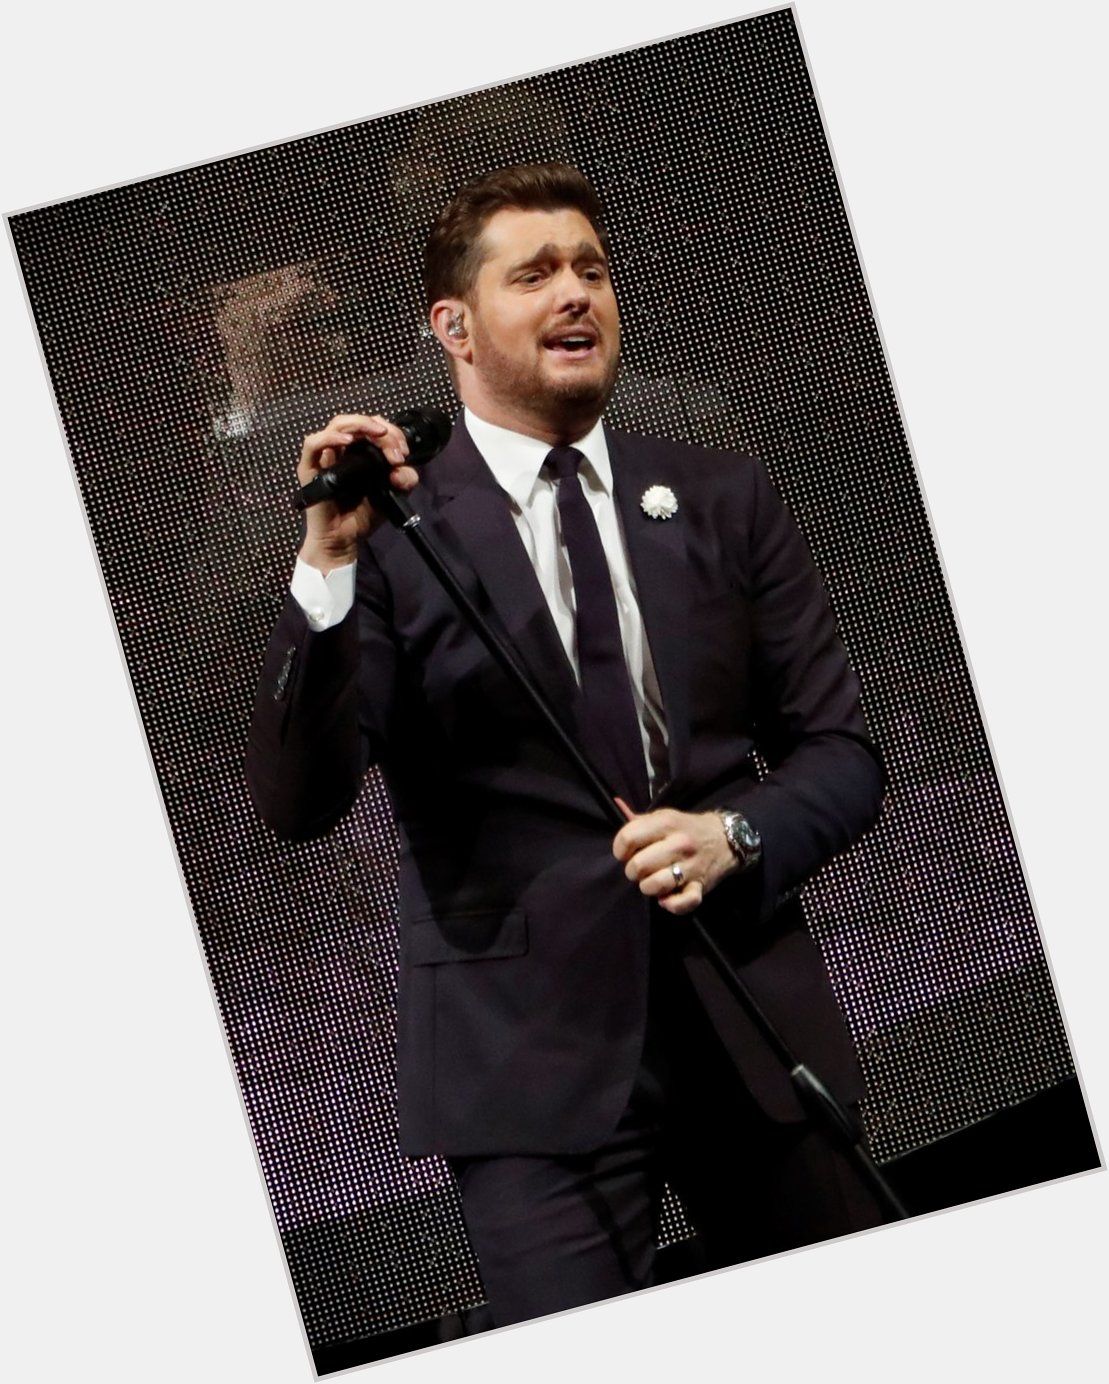 Happy birthday shoutout to Michael Buble, who turns 46 today! (Reuters) 